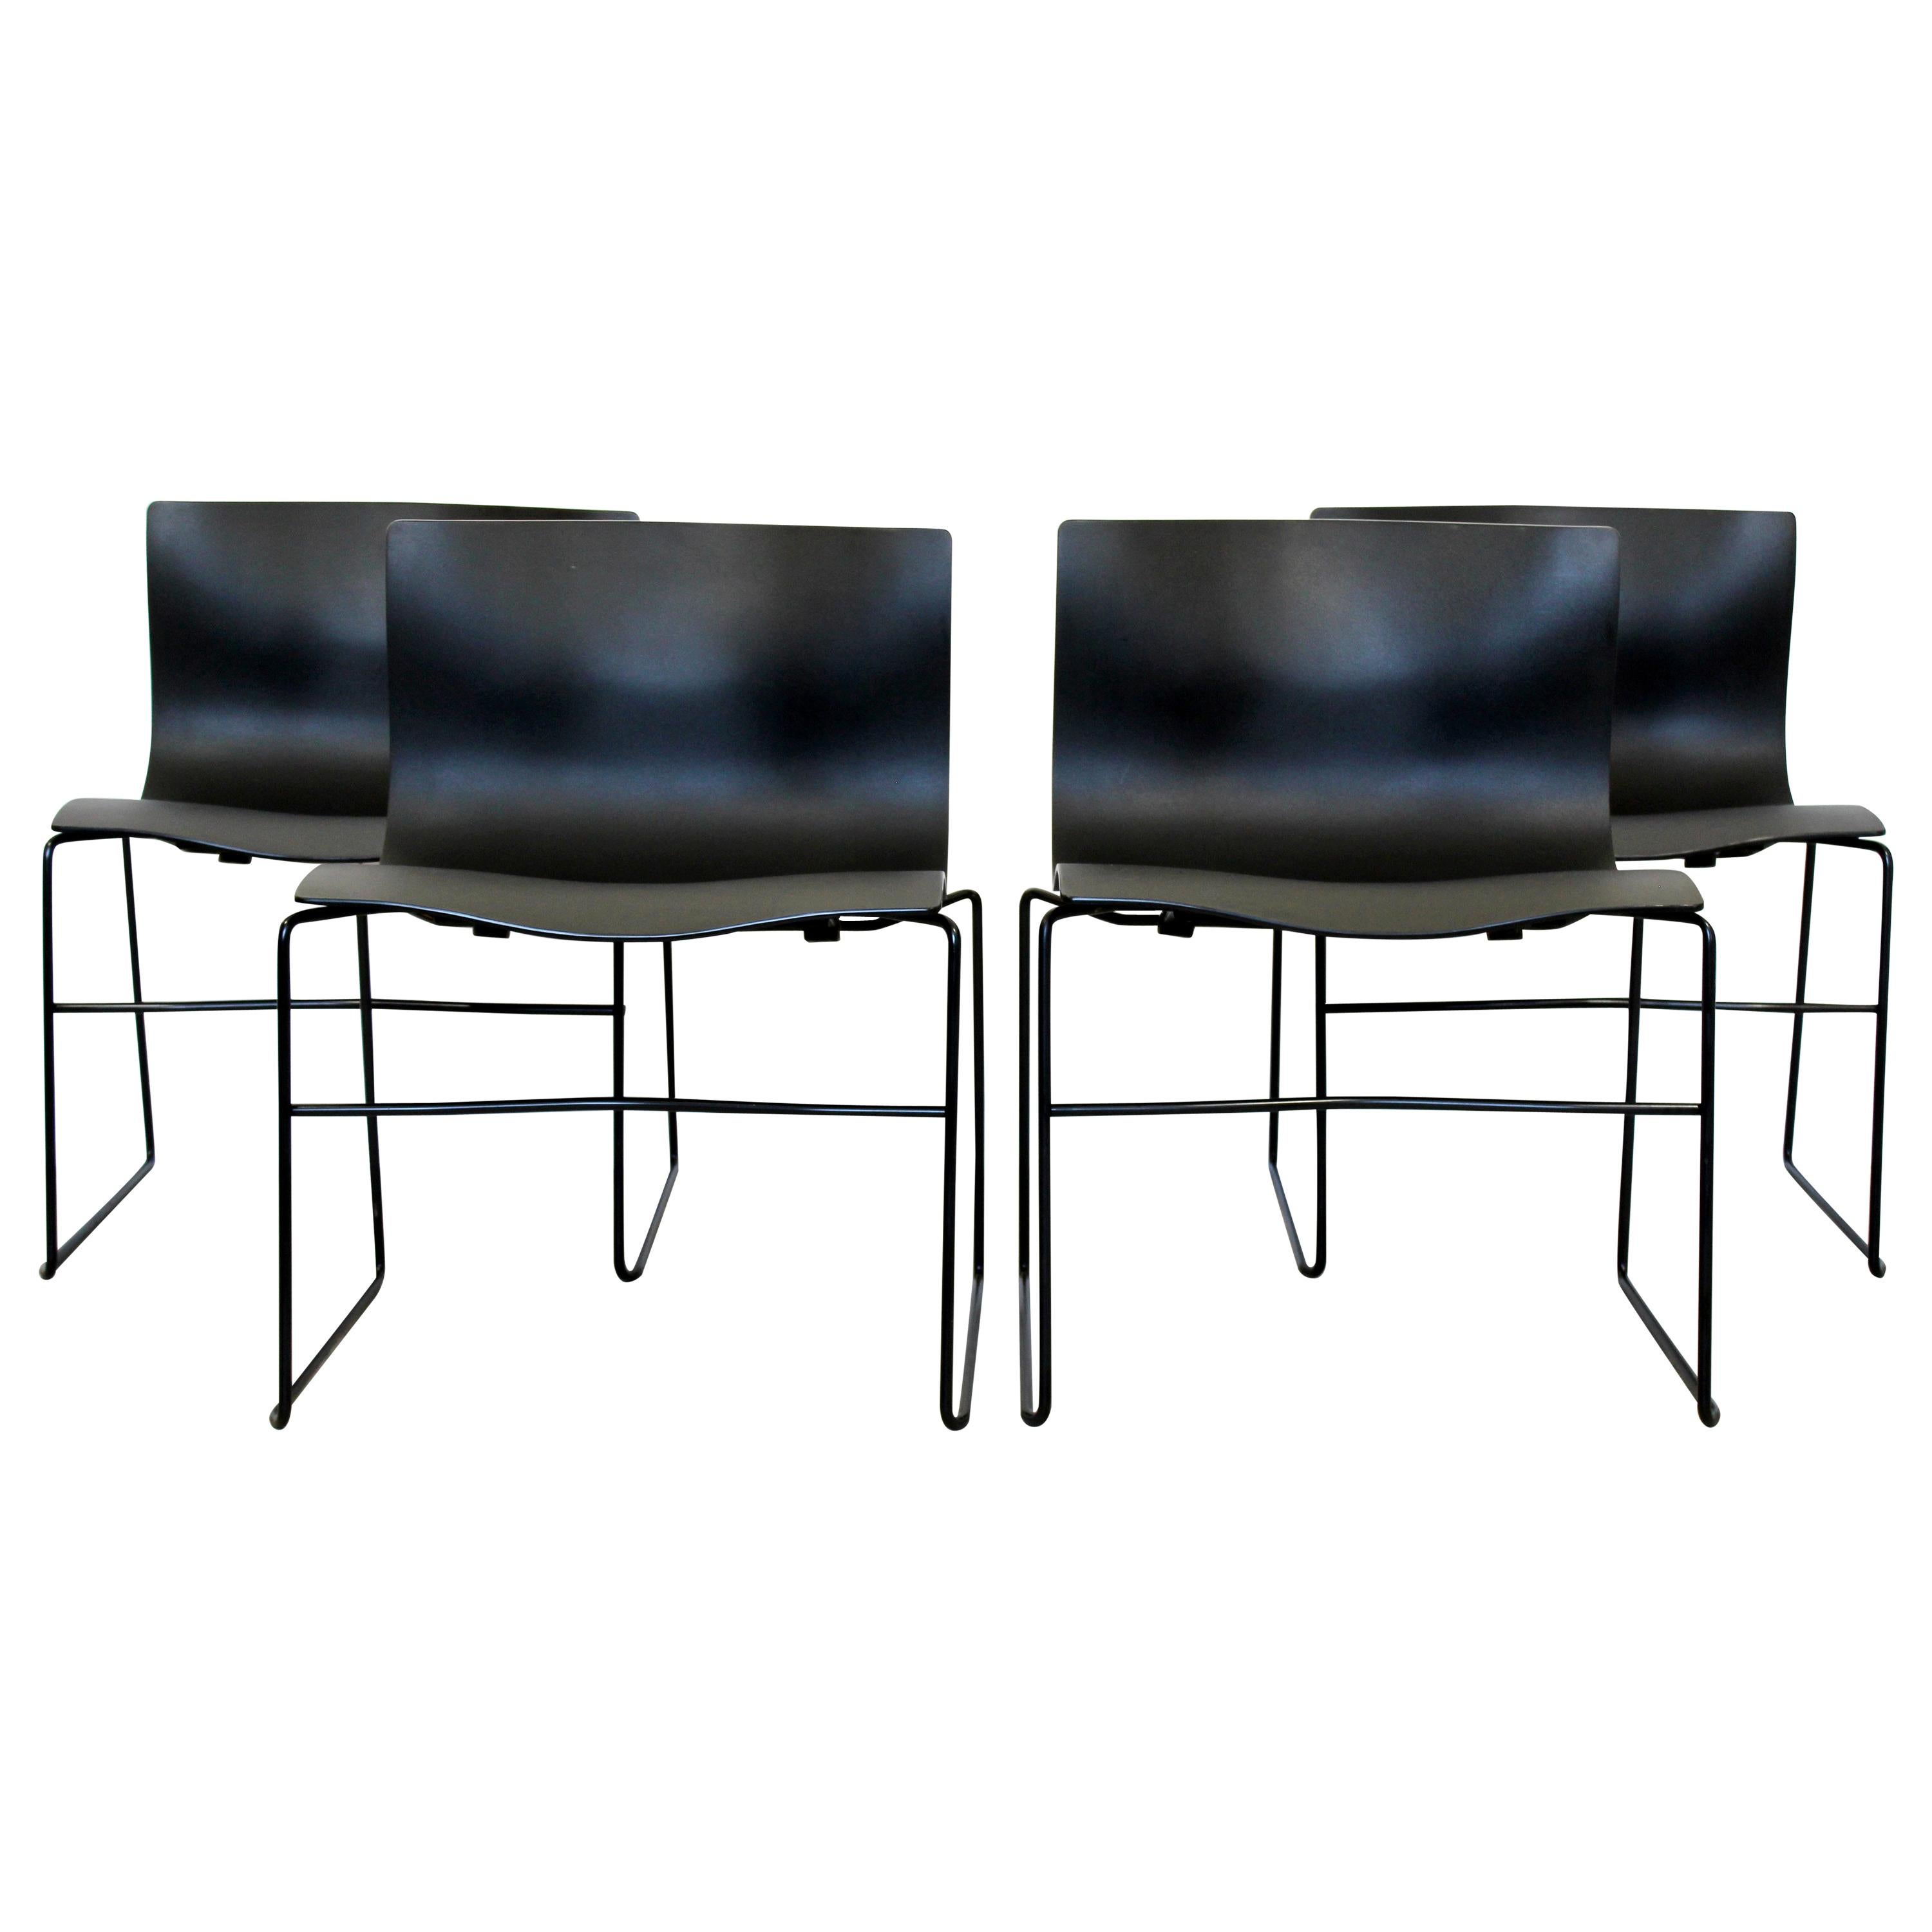 Contemporary Modern Massimo Vignelli Knoll Set of 4 Handkerchief Side Chairs